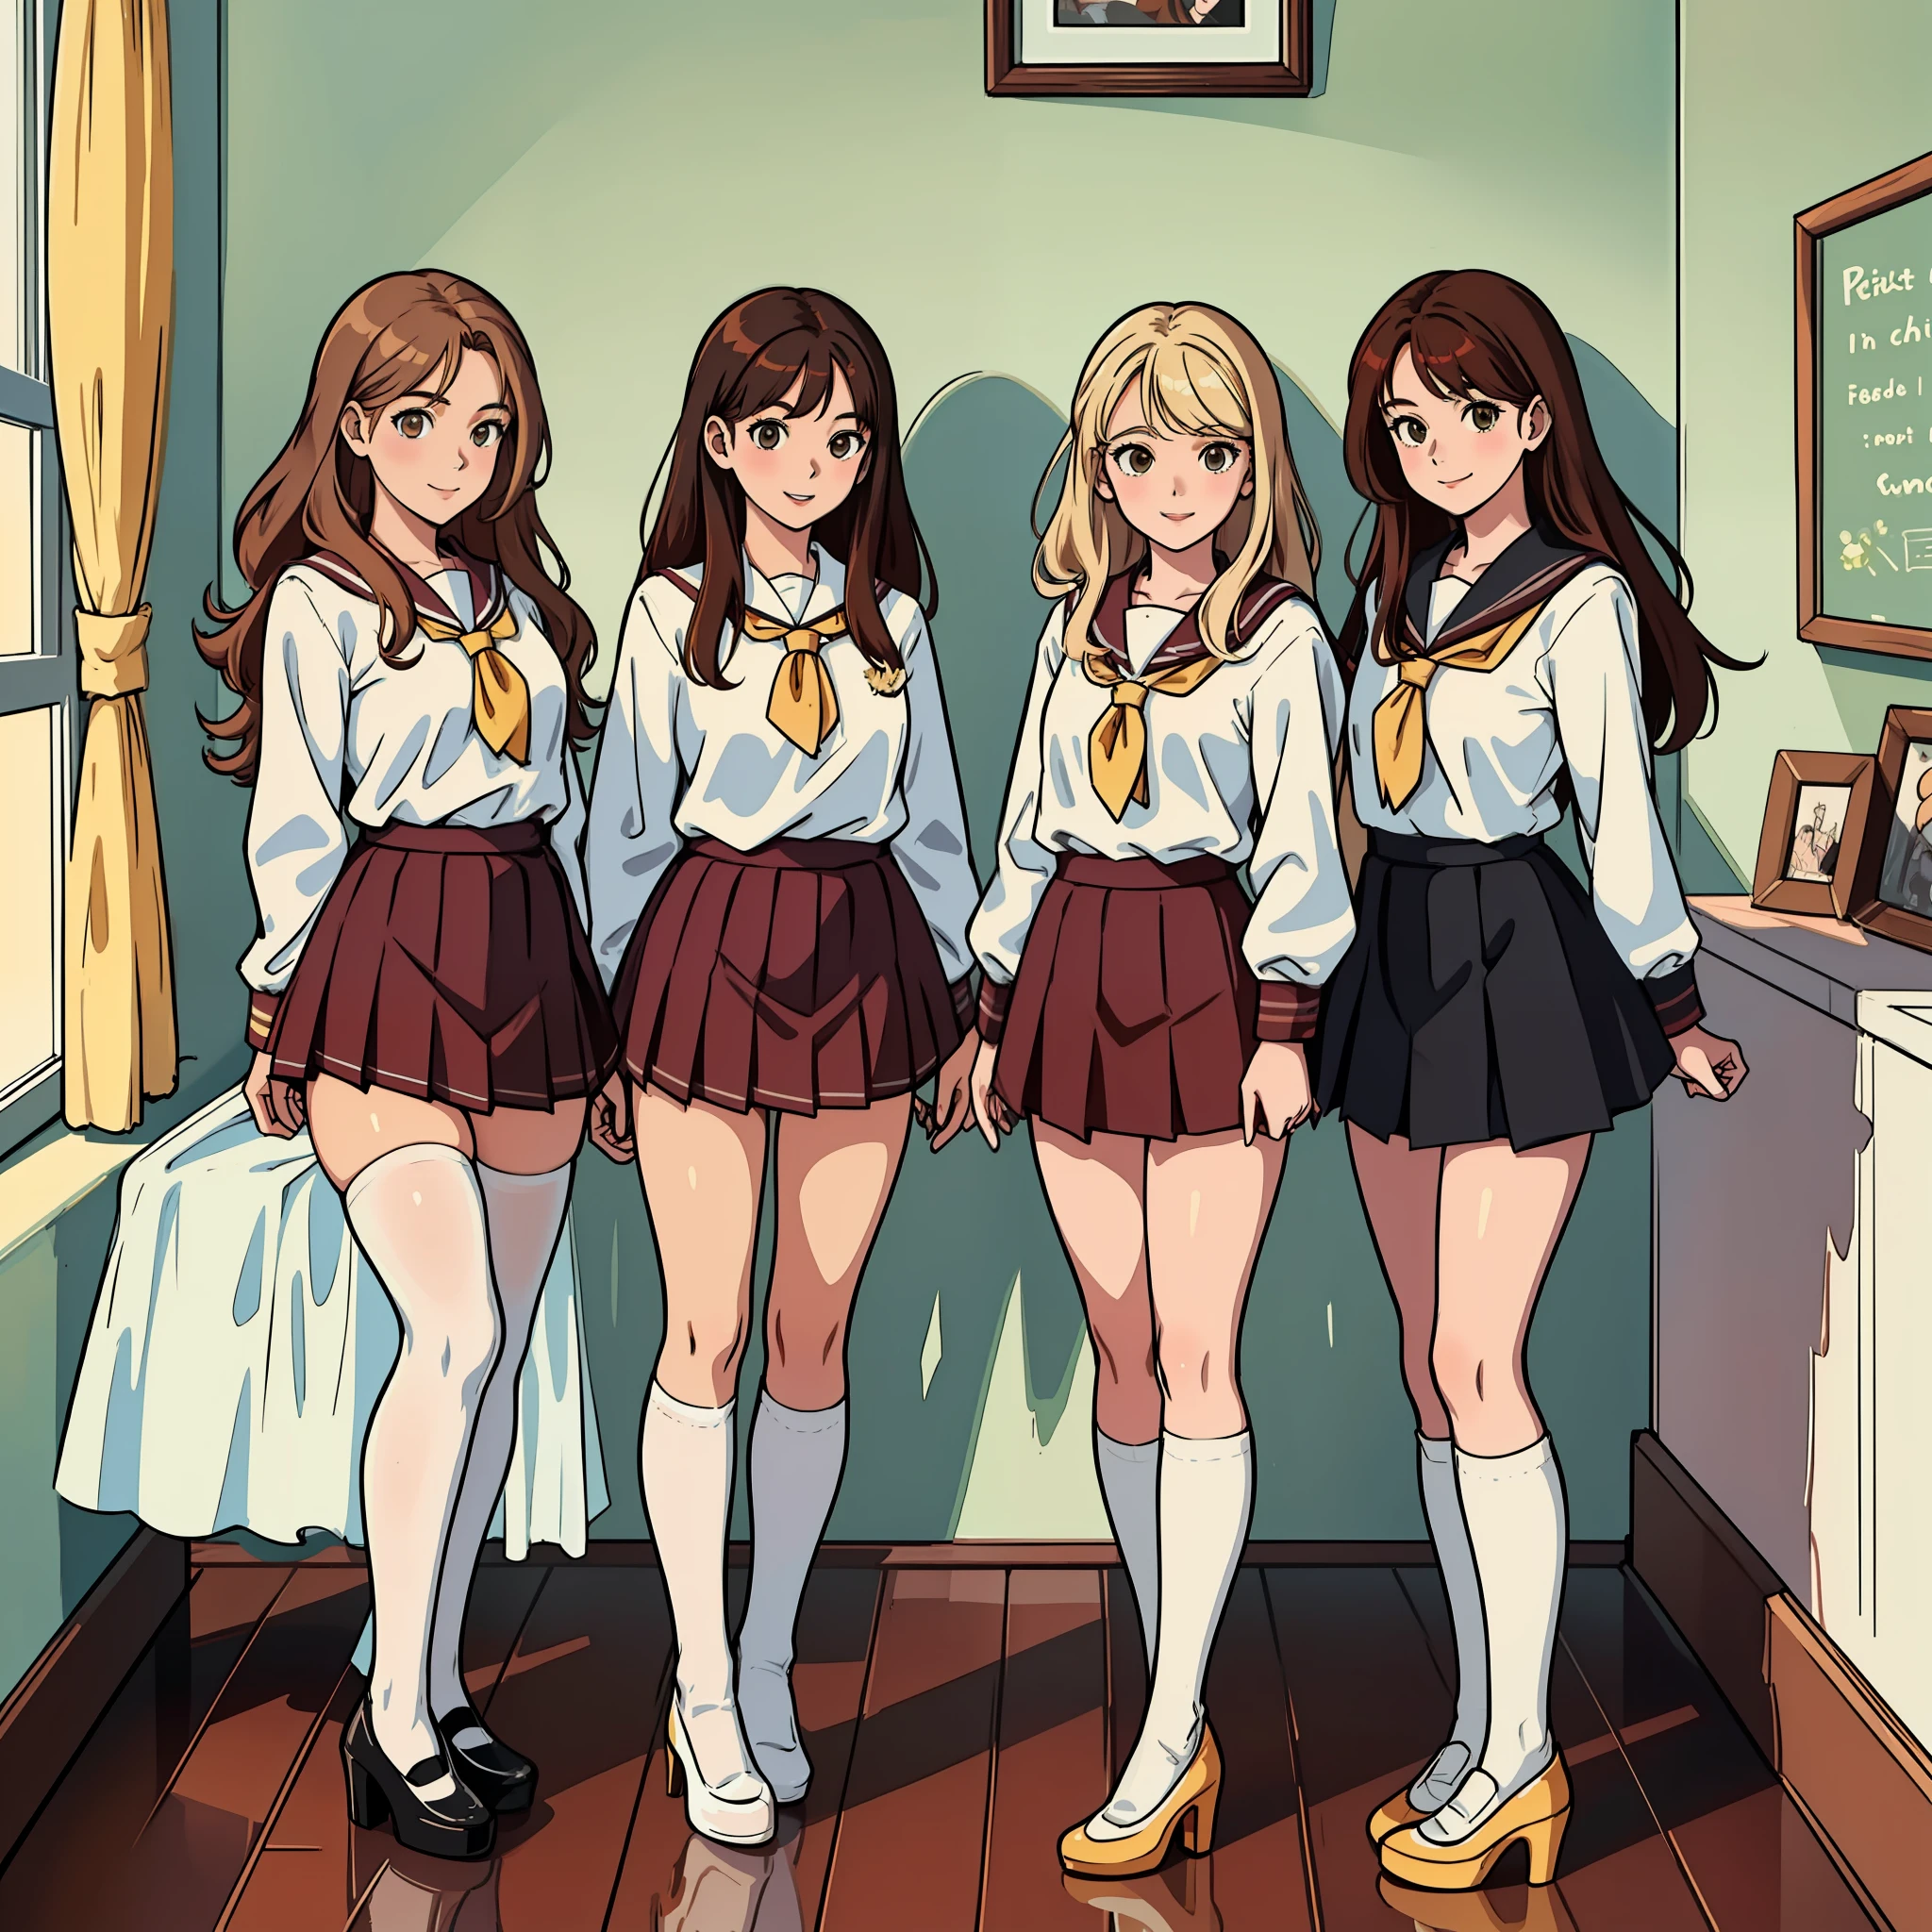 perfect anime illustration, teenage girls, medium breasts, 3girls, (((1 blonde girl, 1 redhead girl, 1 brown haired girl))), same age sisters, rich sexy schoolgirls, brown hair, red hair, blonde hair, curly hair, long hair, different hair colors, hazel eyes, smiling, white skin, (((school uniform, white thigh high socks, black high heels))), matching outfits, highres, bedroom, full body, posing